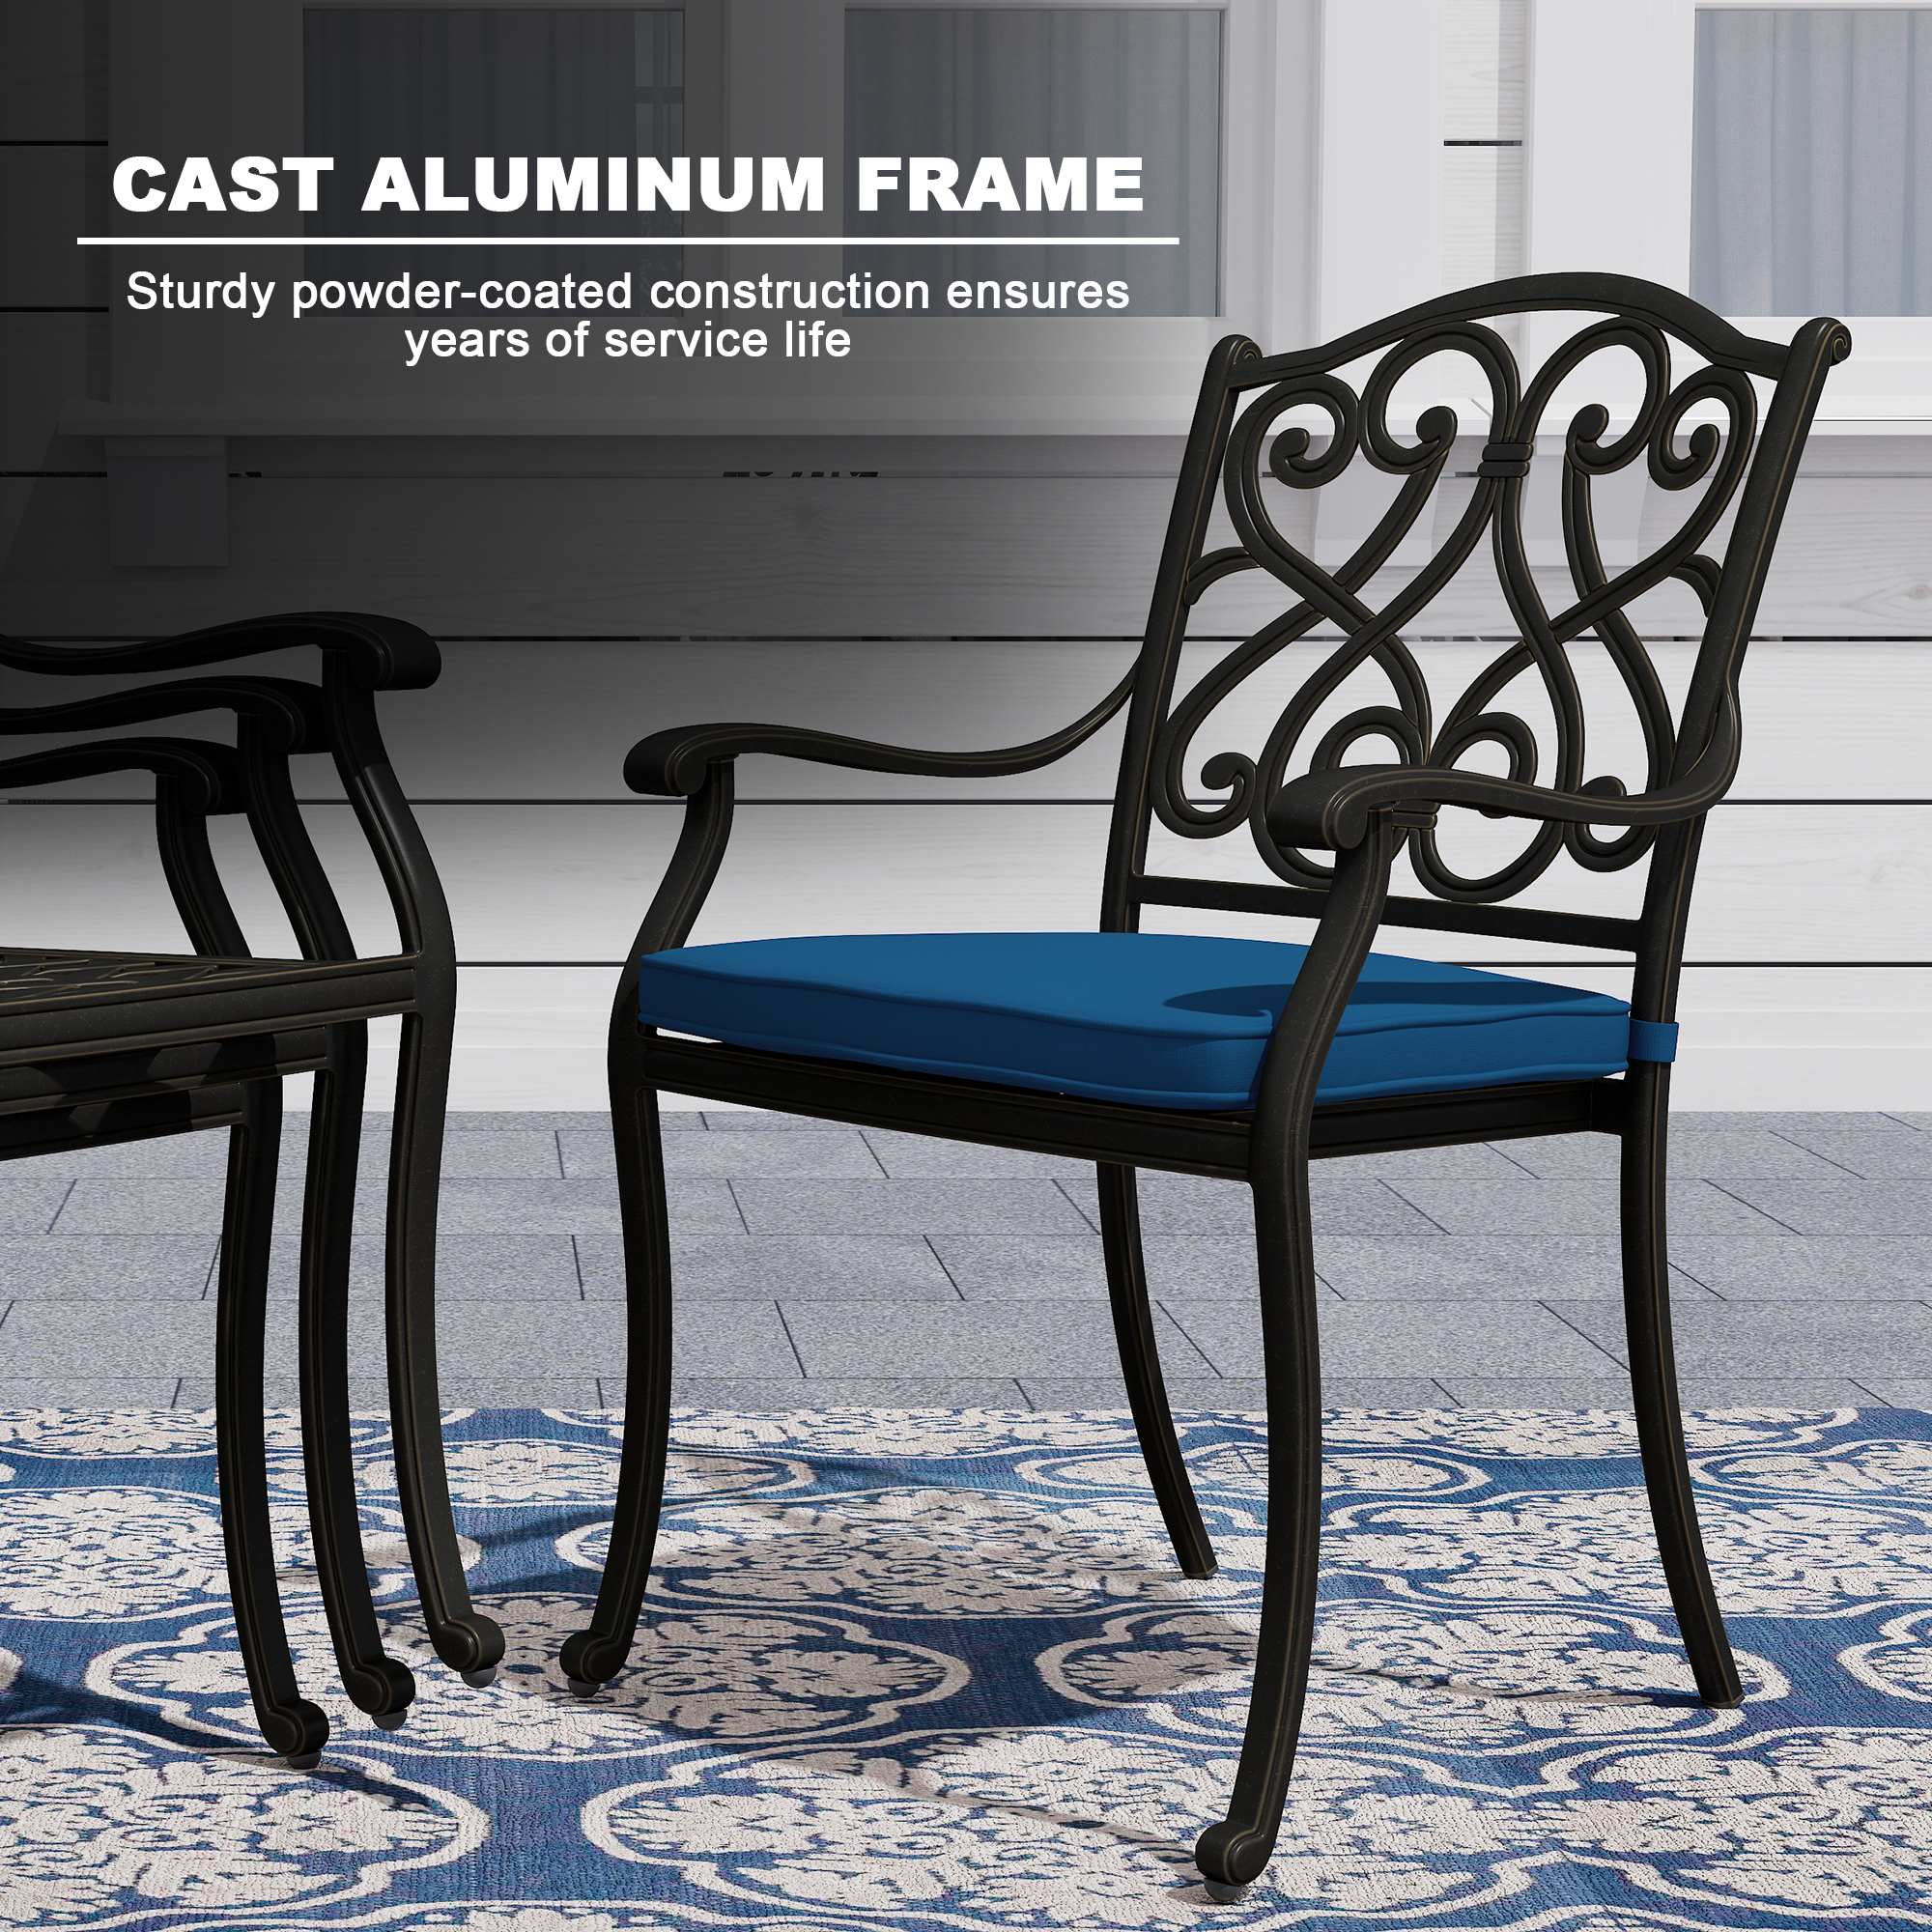 9-Piece Outdoor Dining Set Cast Aluminum with 1 Rectangle Expandable Table 8 Pieces Dining Chairs with Cushion